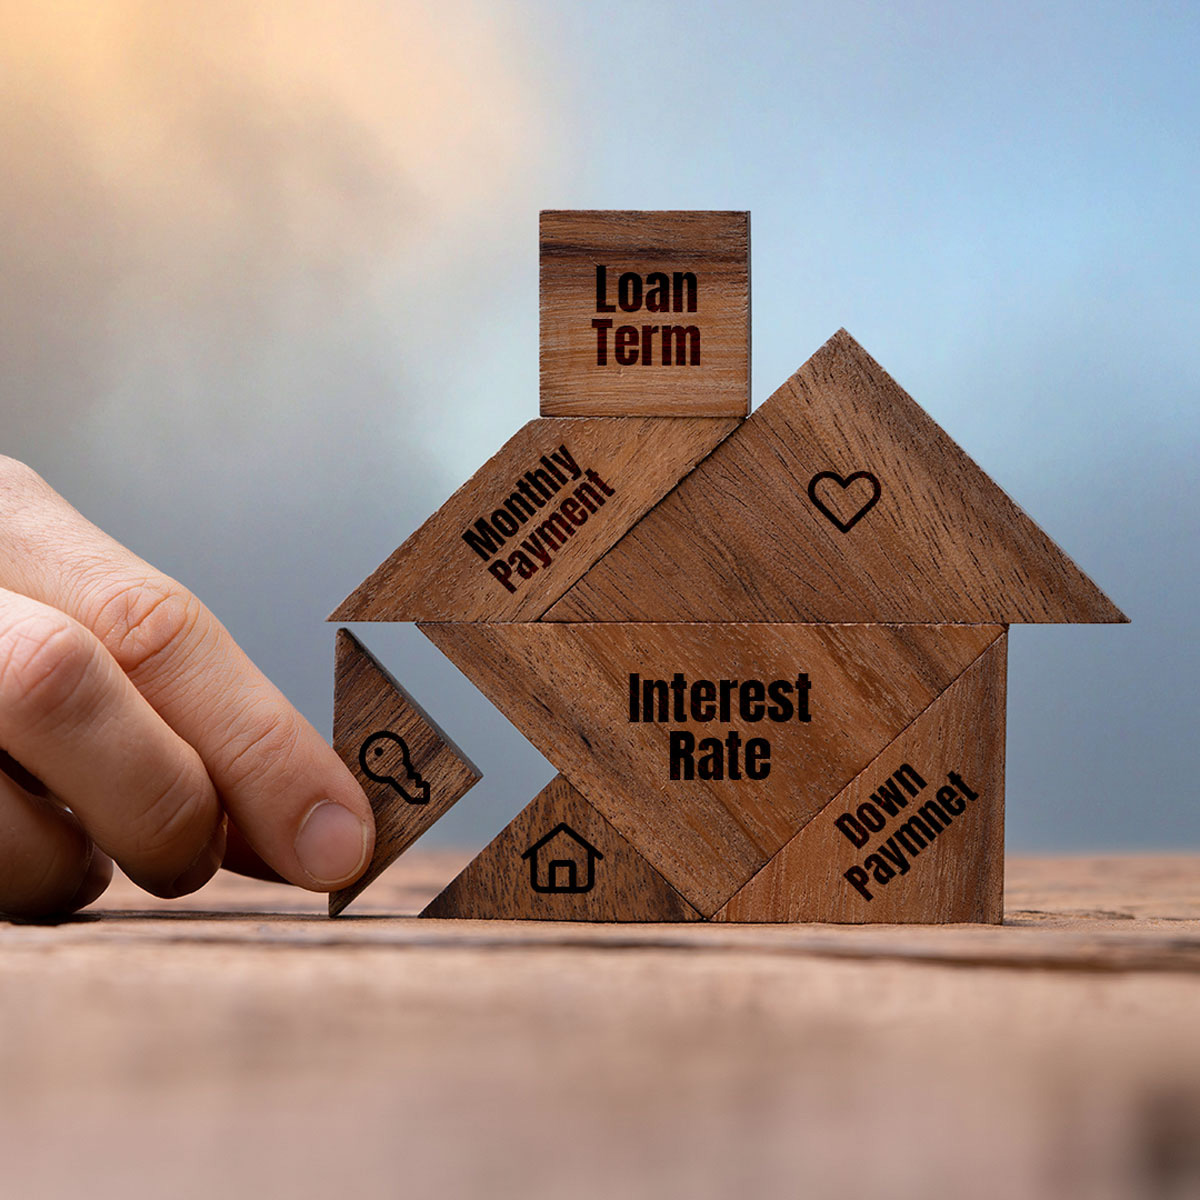 Looking for mortgage options? Contact me for a wide selection of rates and choices to fit your financial needs. #mortgagebroker #lendingoptions #financialfreedom